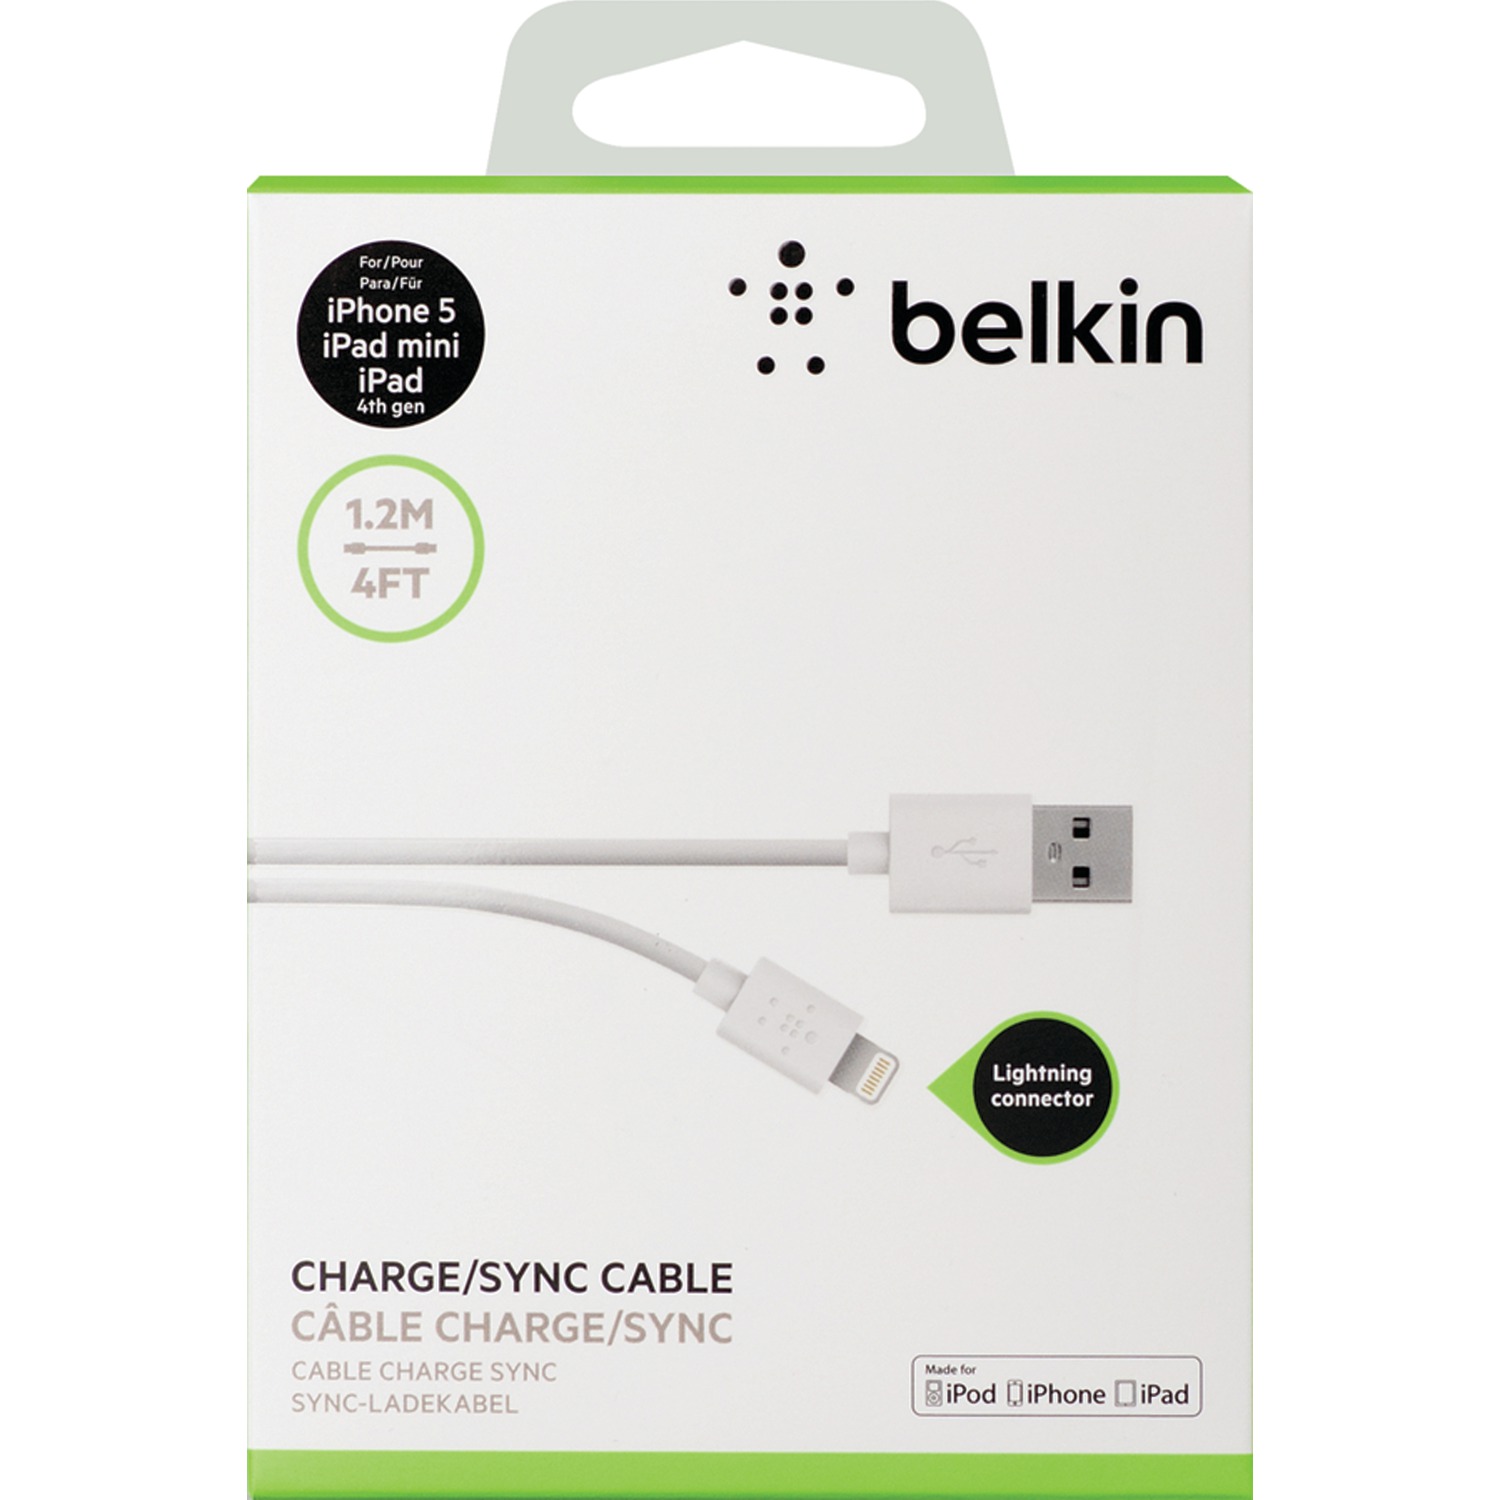 Belkin MIXIT Lightning to USB ChargeSync Cable - image 2 of 2